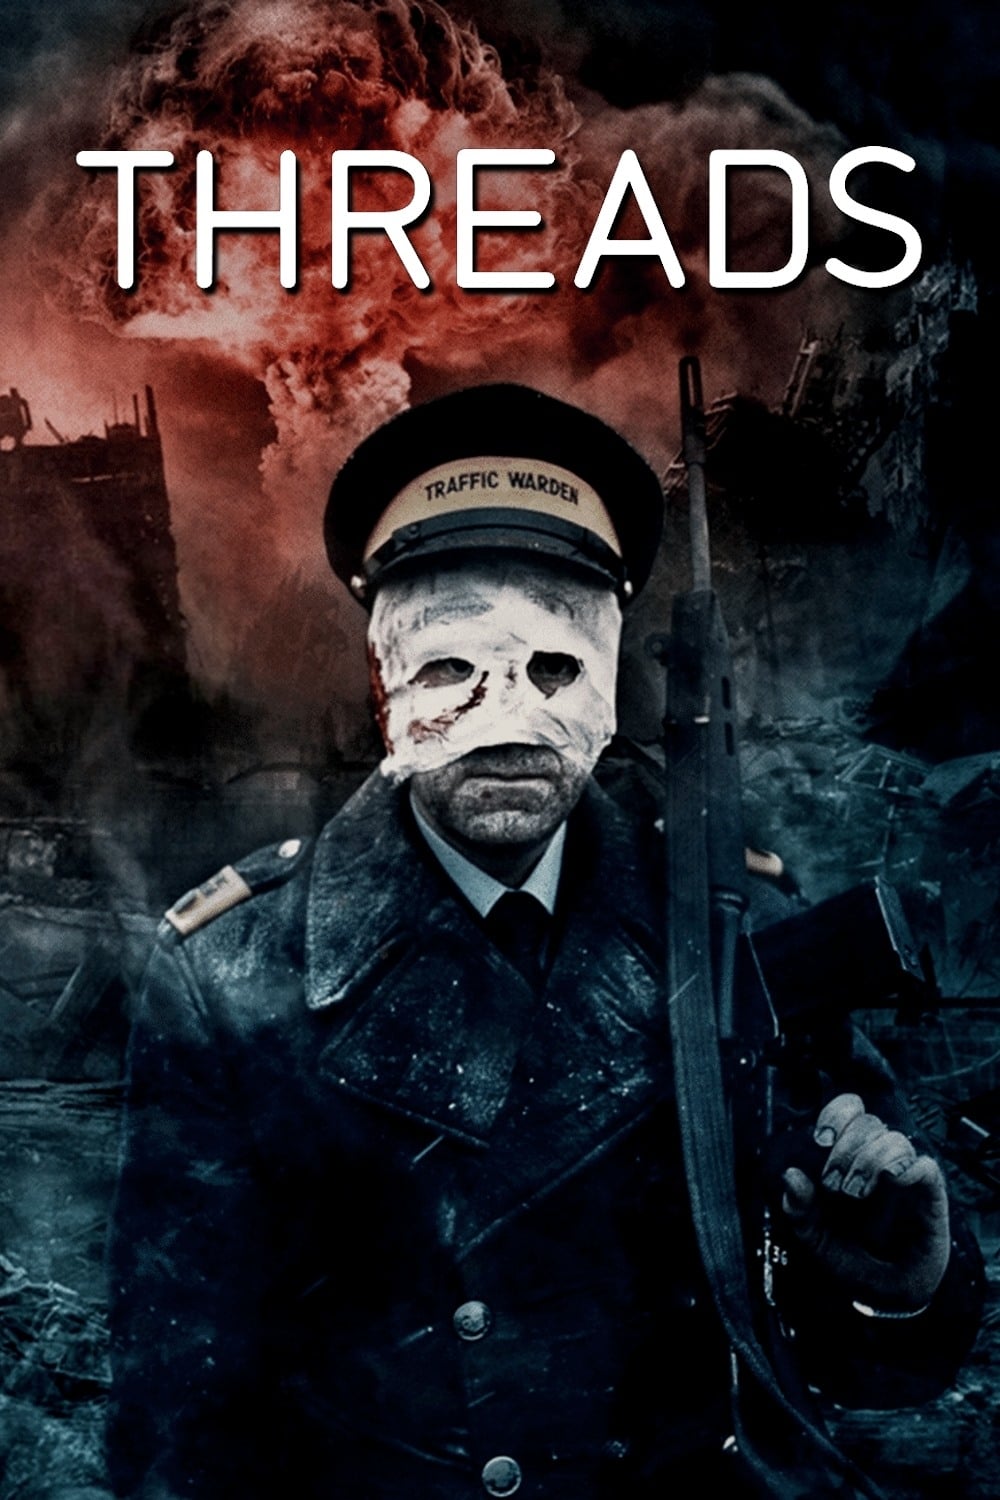 Threads:Revisiting one of the most terrifying films ever made